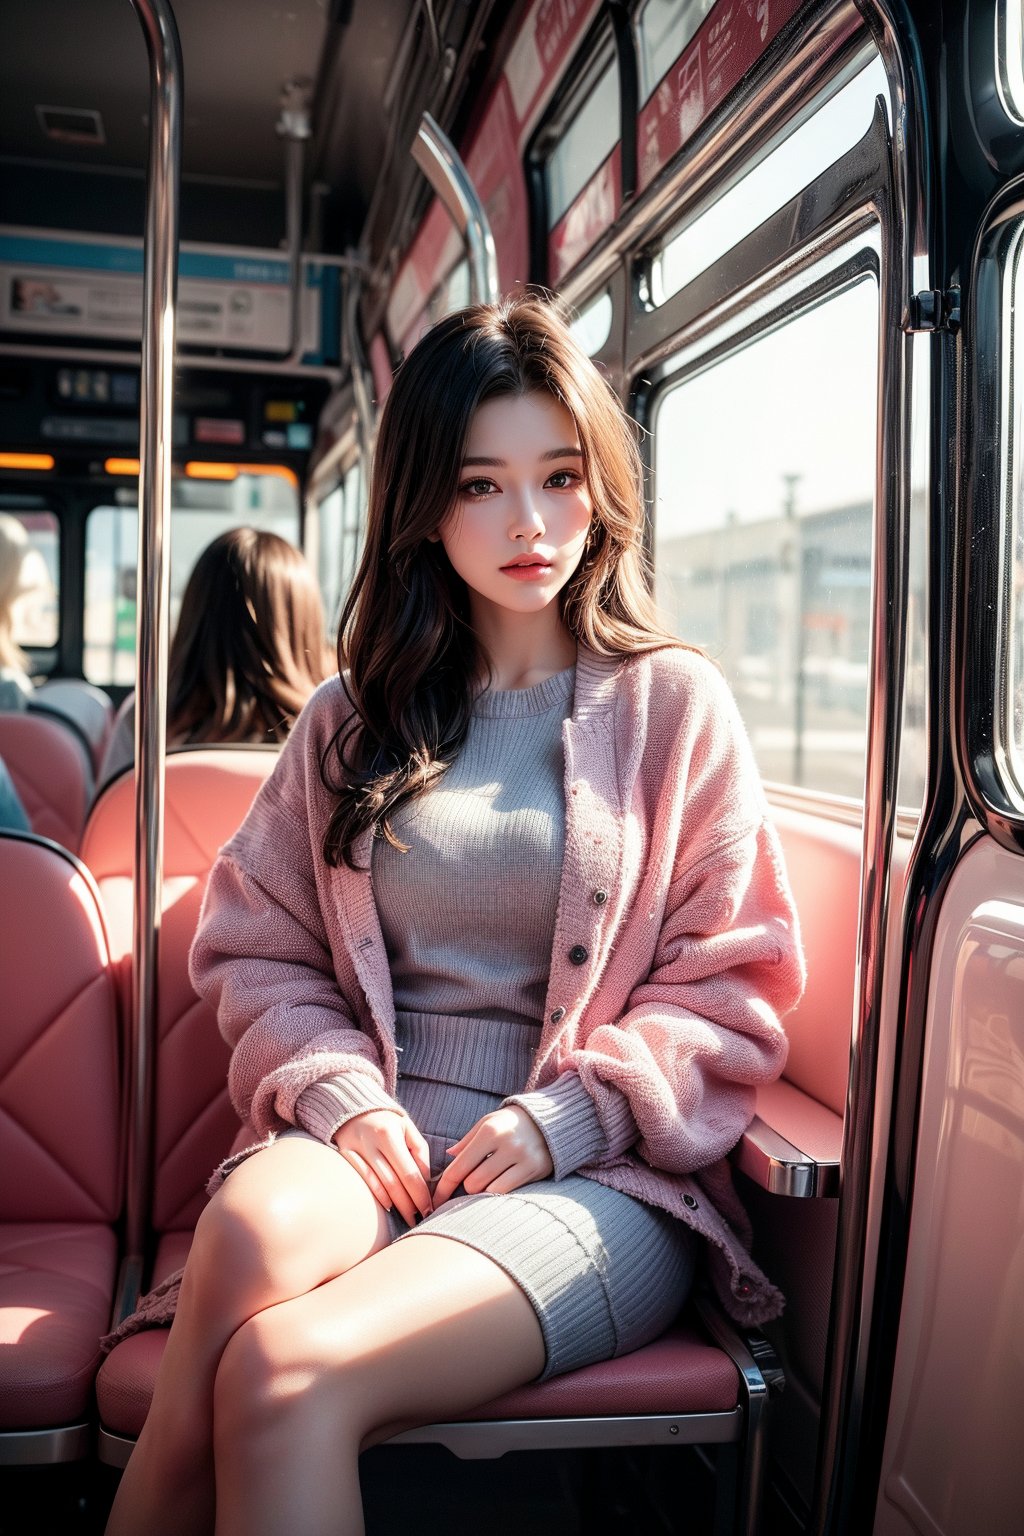 Presenting a bright and realistic style. At the center of the composition is a young woman sitting inside a modern, bright bus. Dressed casually in a light sweater and pink coat, she looked out with a soft smile. The bus seats are covered in blue geometric-patterned fabric, adding a splash of color. Large windows partially reveal the scene of rain outside, enhancing the warm atmosphere inside. The orange armrests and lavender seat headrests are clearly visible, providing structural elements to the scene. The overall atmosphere is calm and reflective.